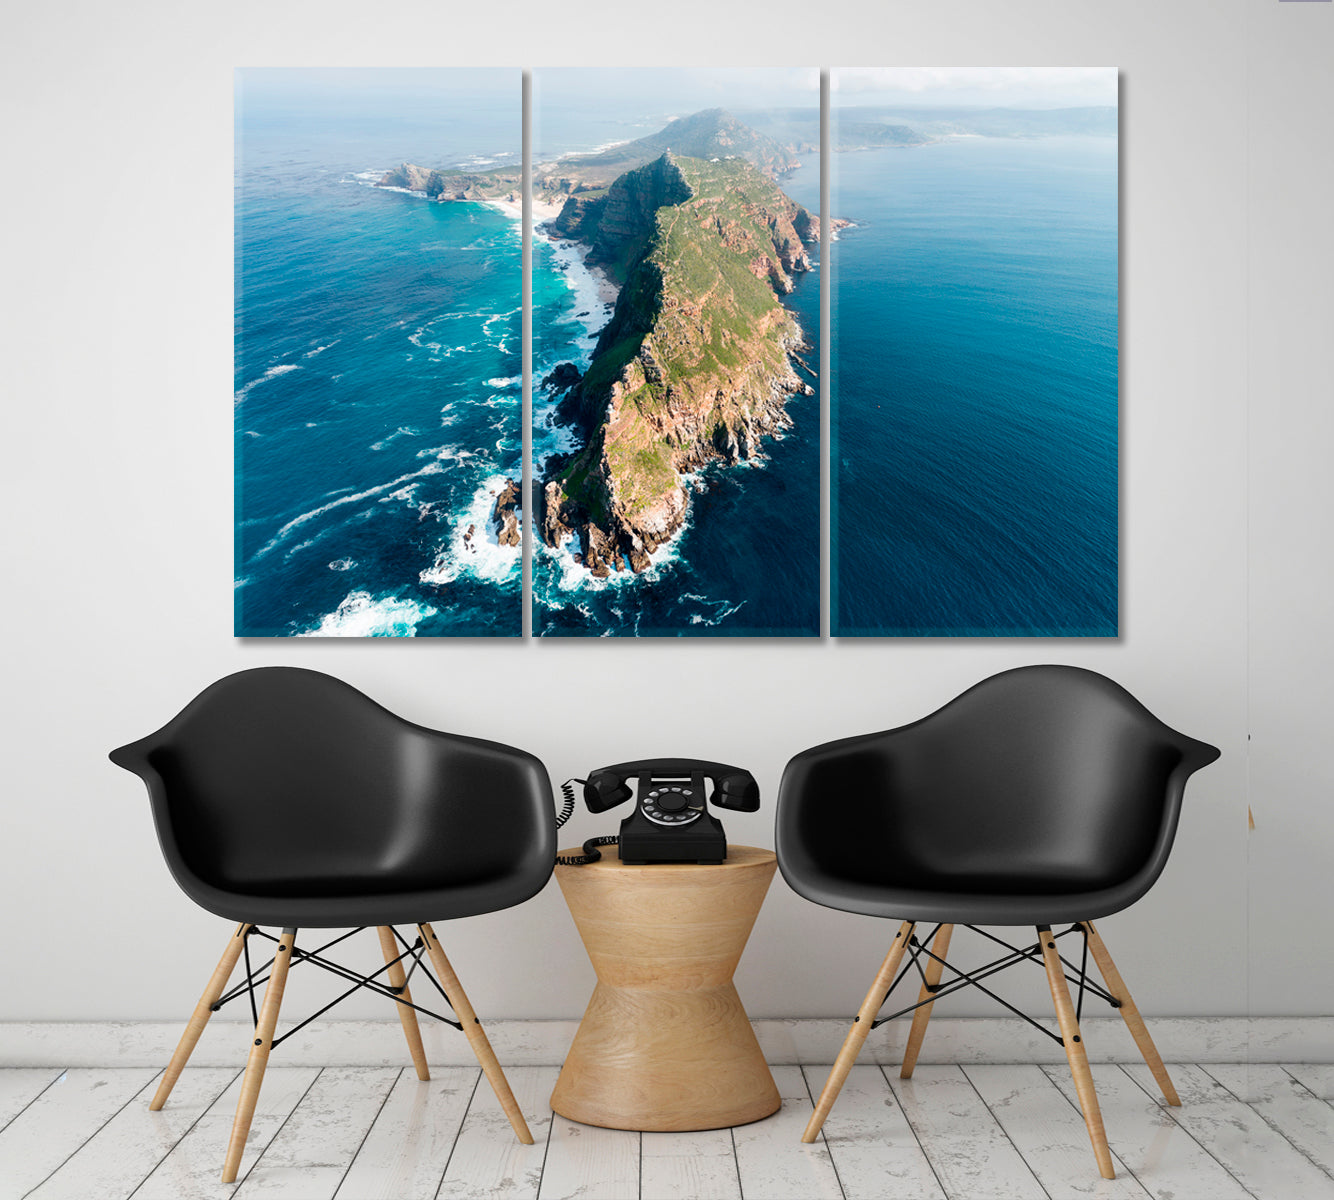 Where Two Oceans Meet in Cape Point South Africa Cities Wall Art Artesty 3 panels 36" x 24" 